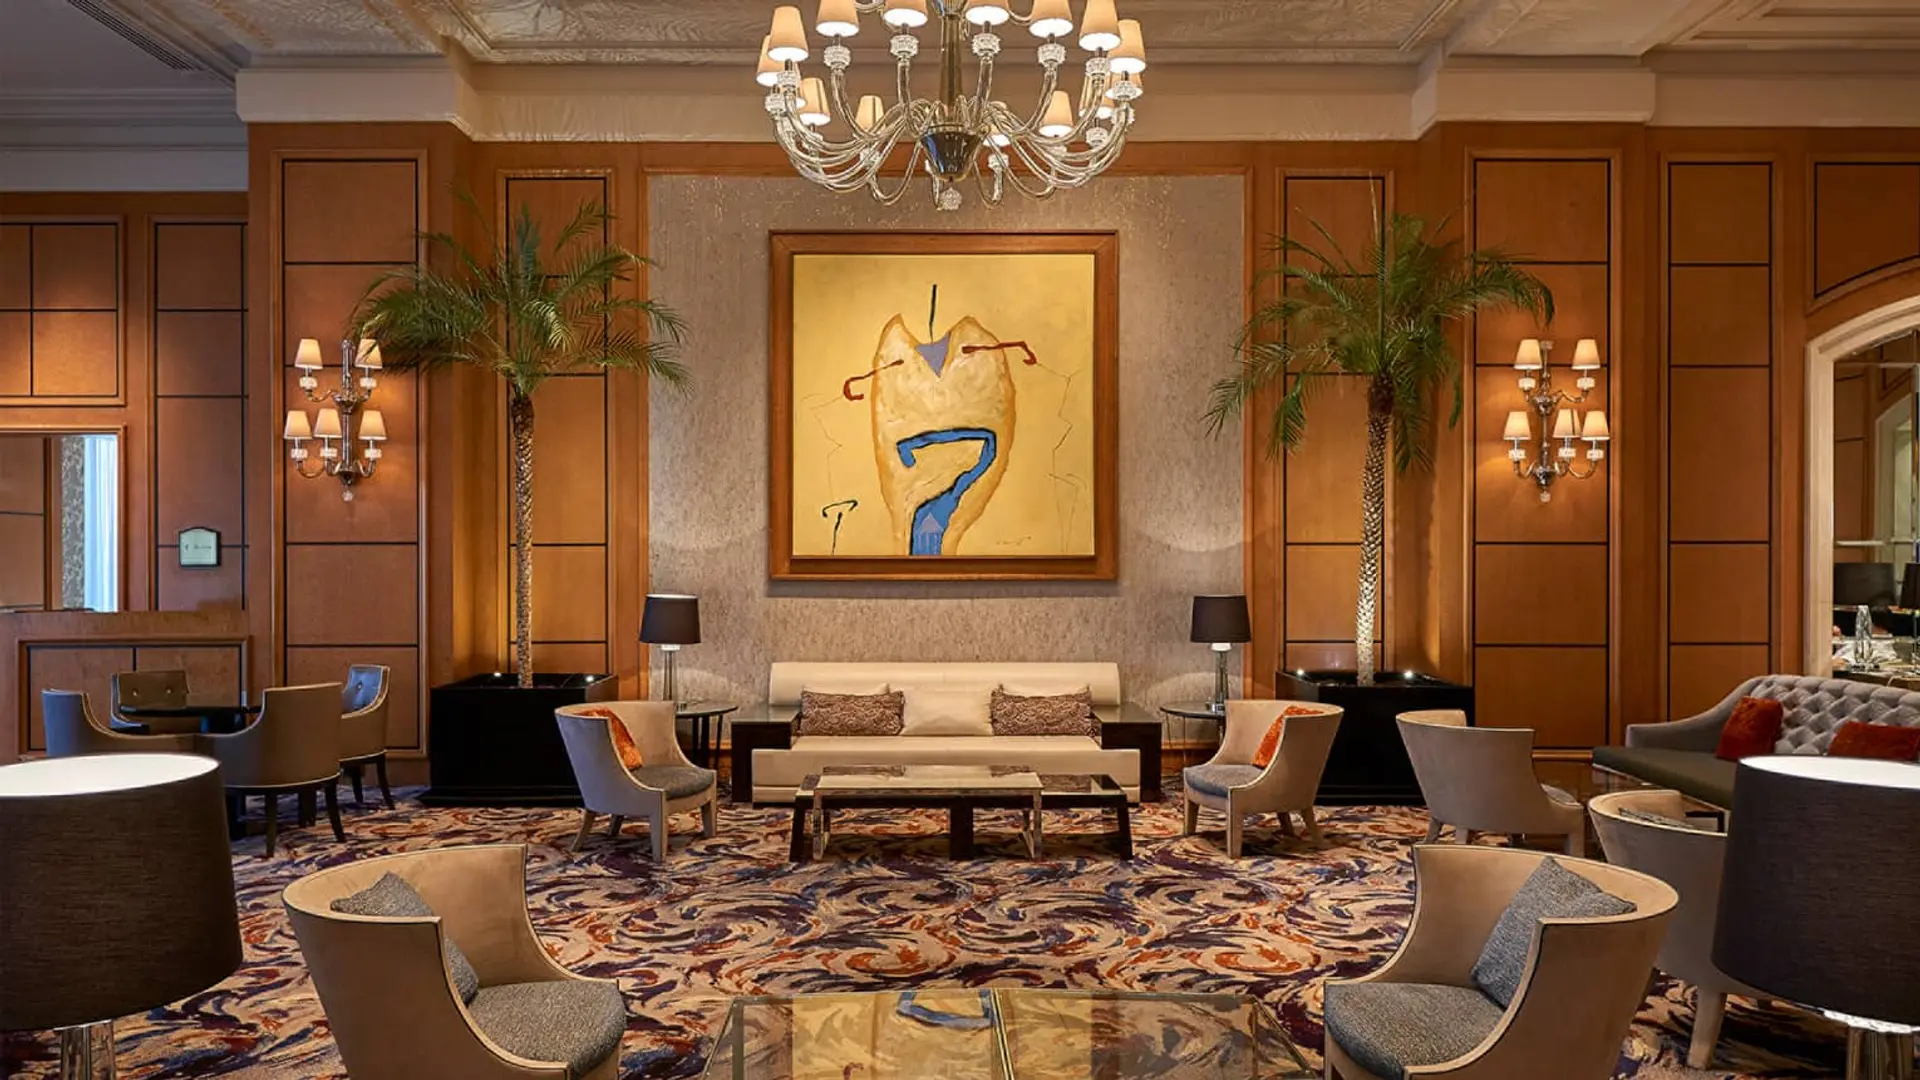 Hotels Toplists - The Best Luxury Hotels in Cairo